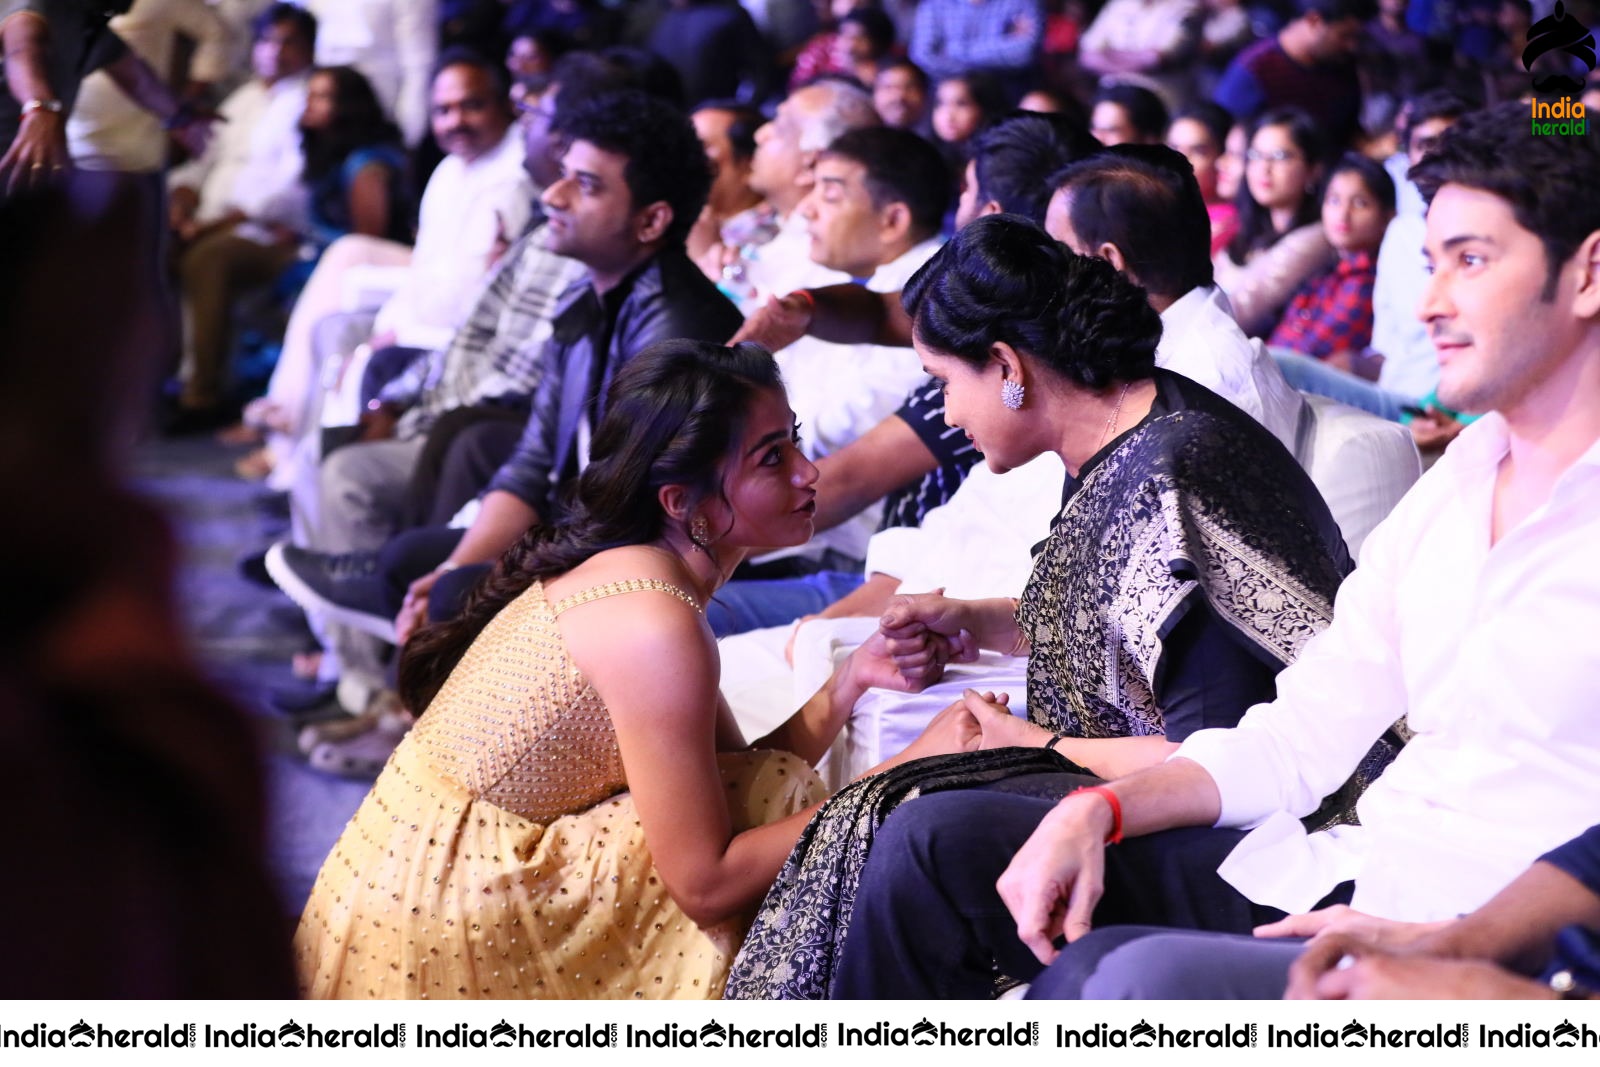 Cute Rashmika Kneels and Chats with Chiranjeevi and Vijayashanthi at the event